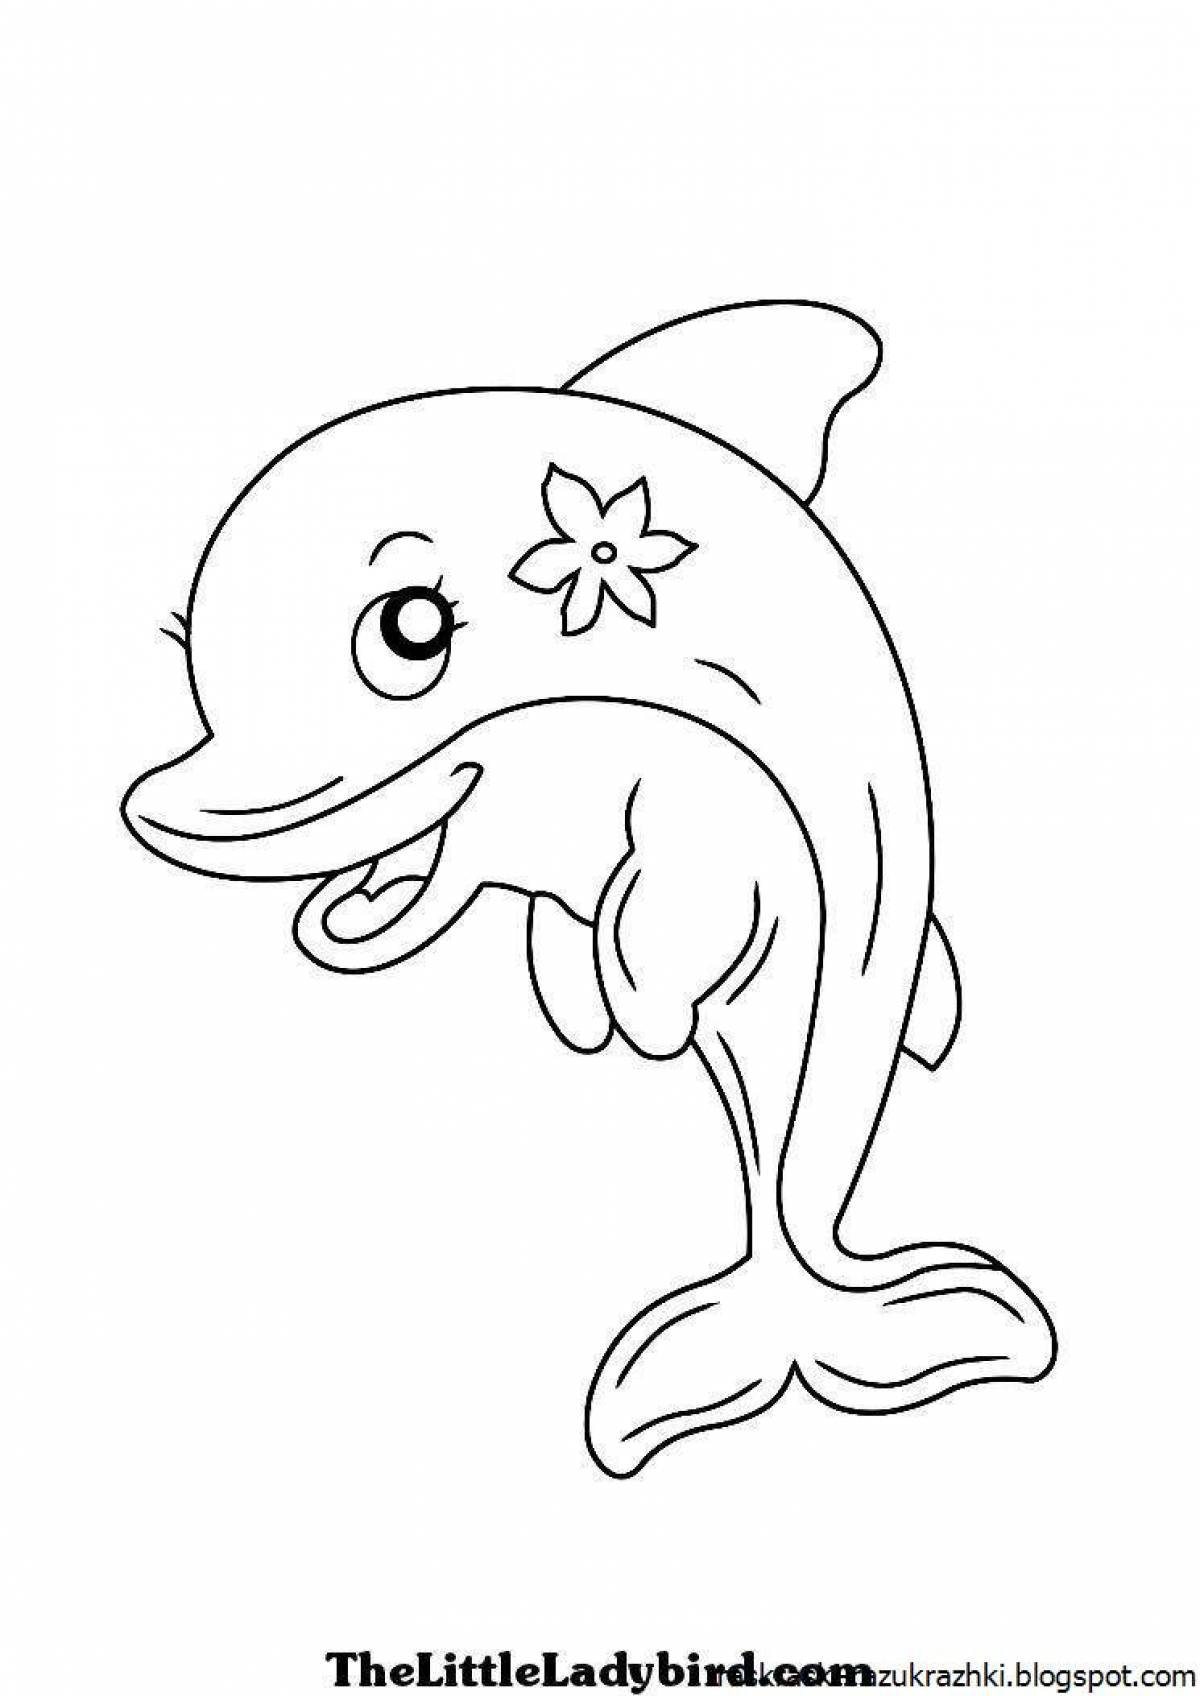 Dolphin fun coloring book for kids